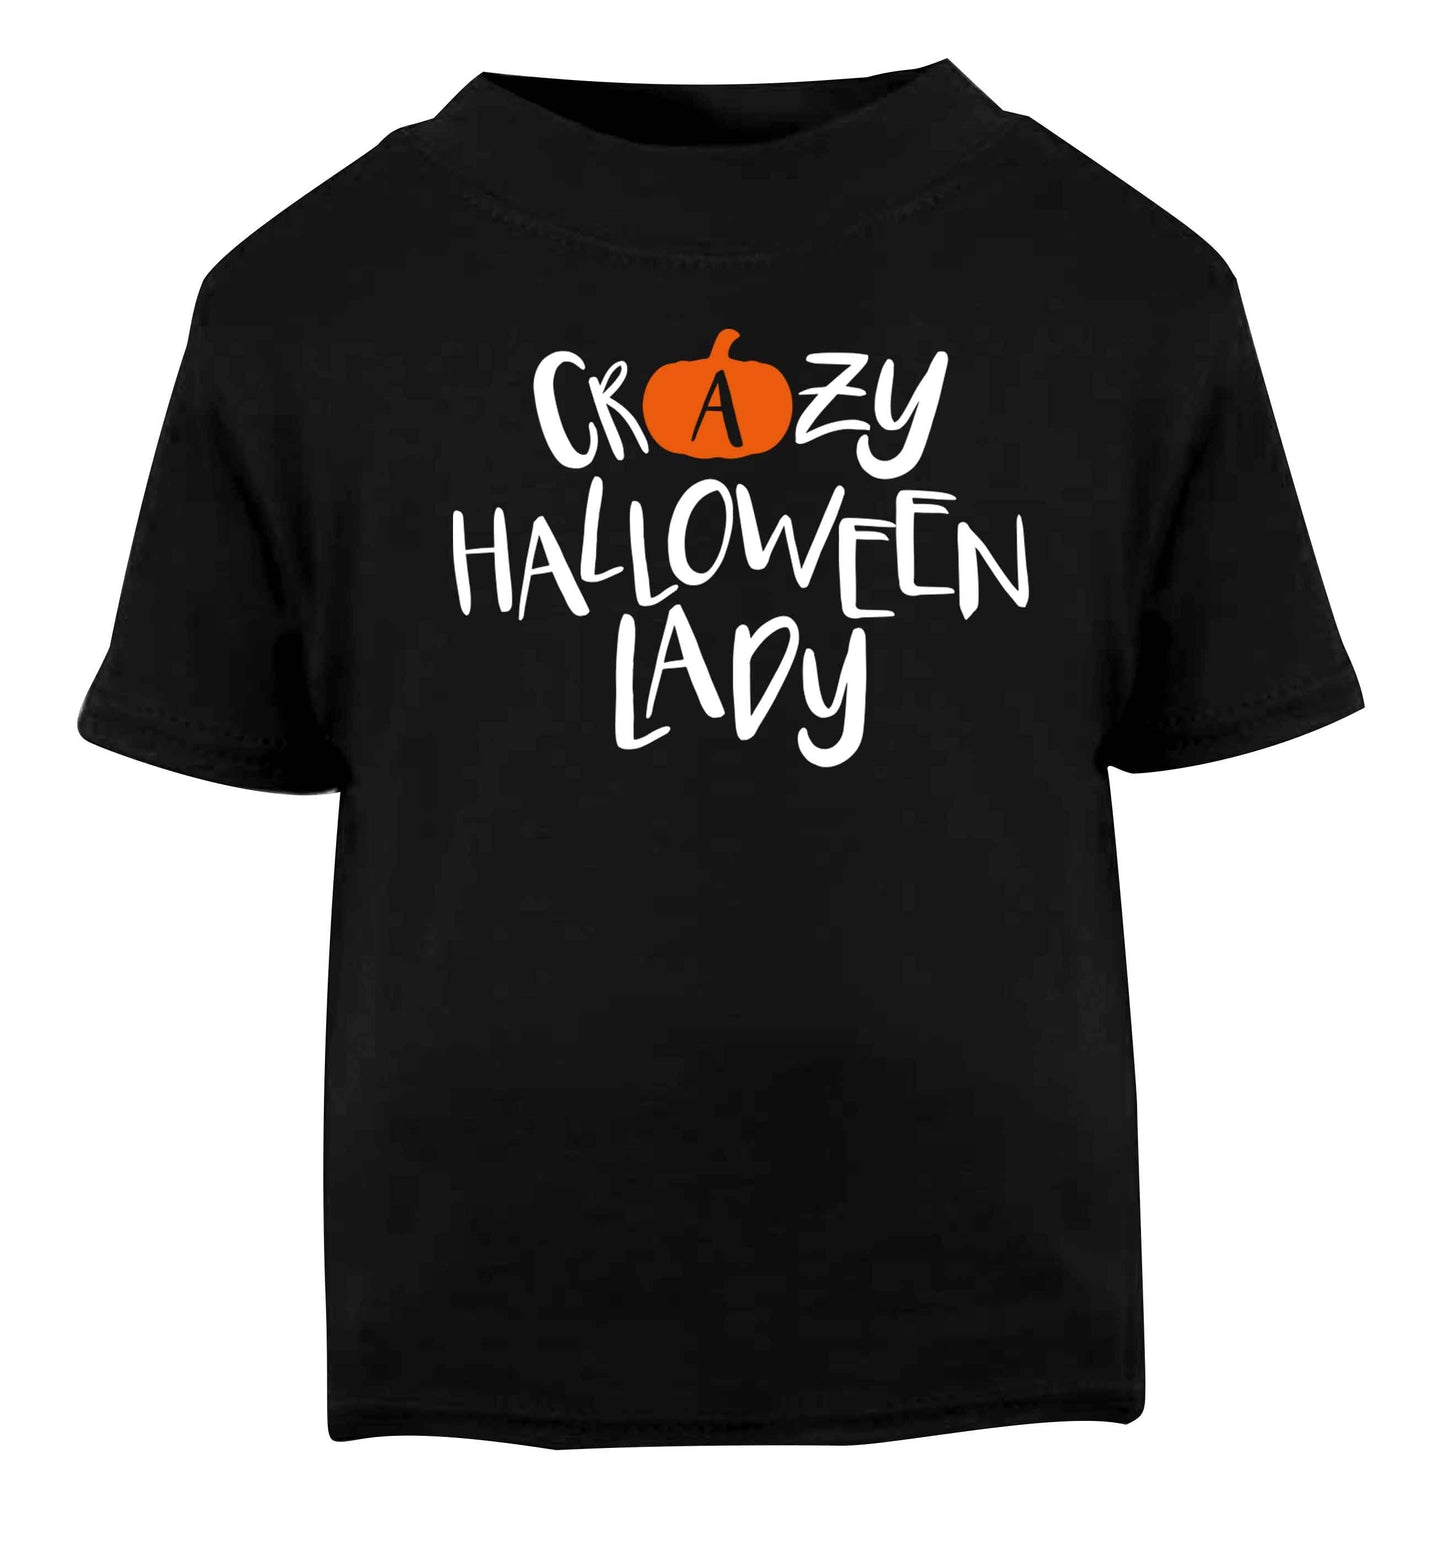 Crazy halloween lady Black baby toddler Tshirt 2 years